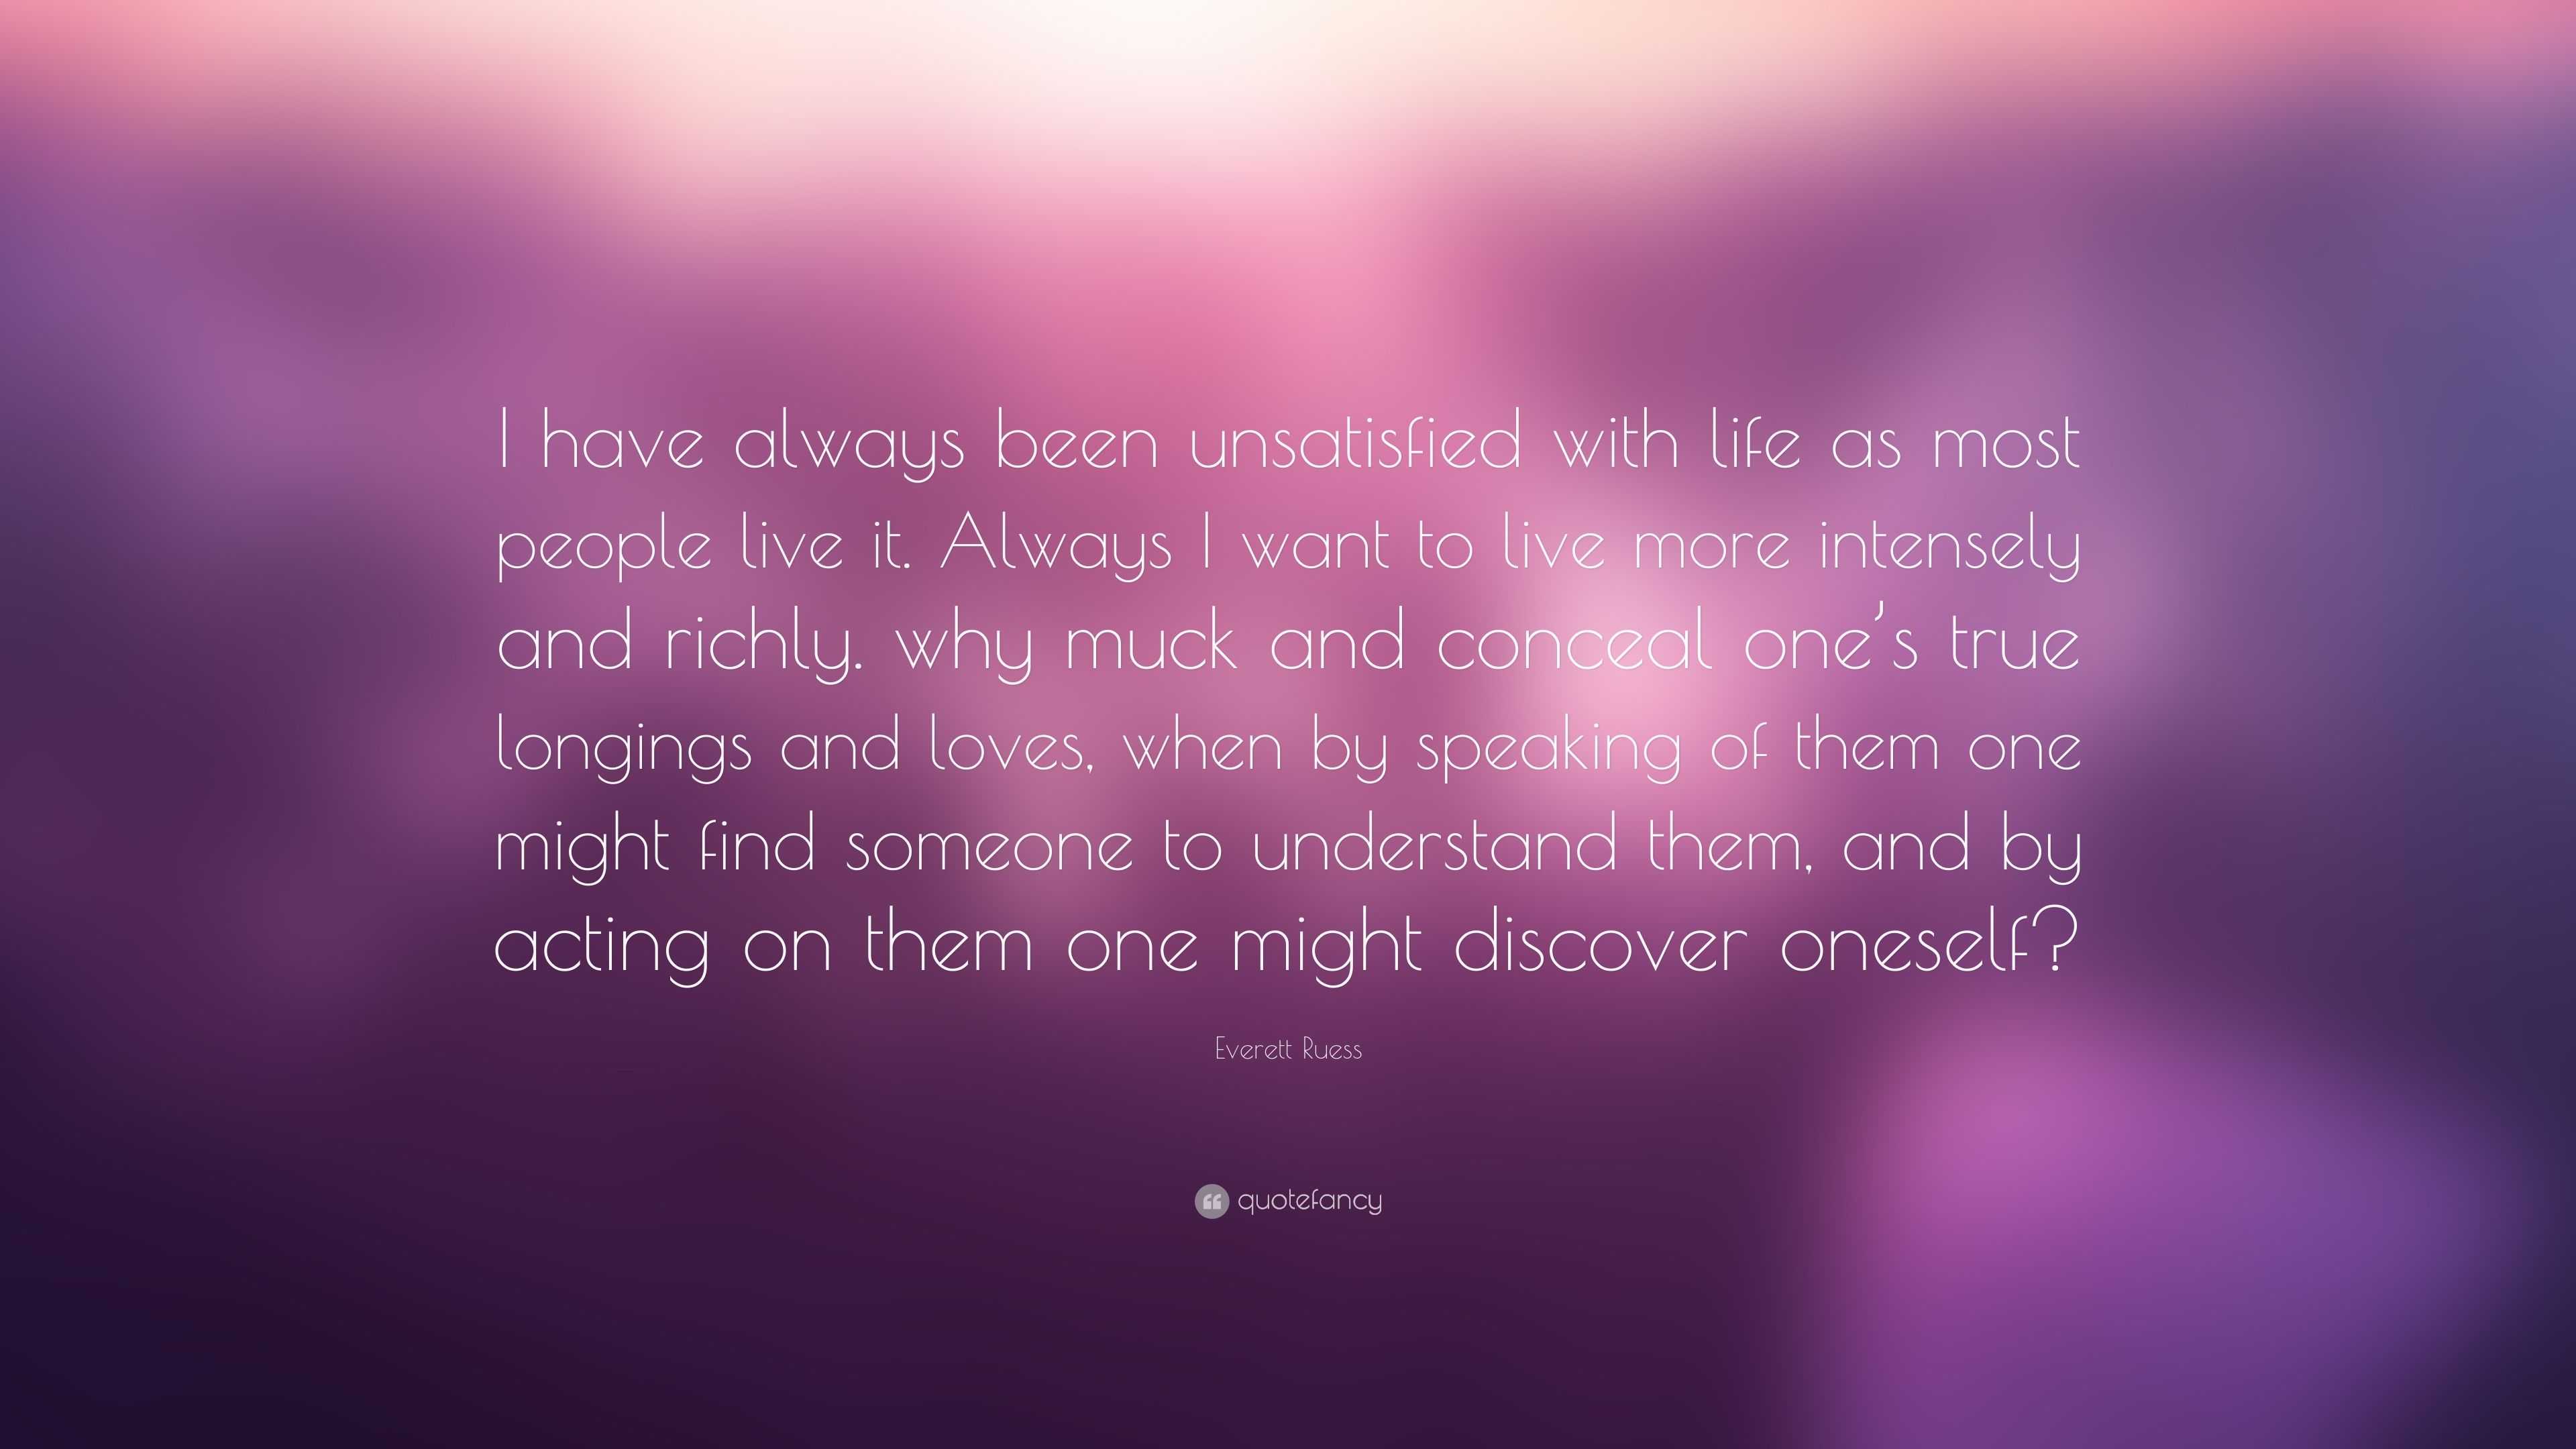 Everett Ruess Quote: “I have always been unsatisfied with life as most ...